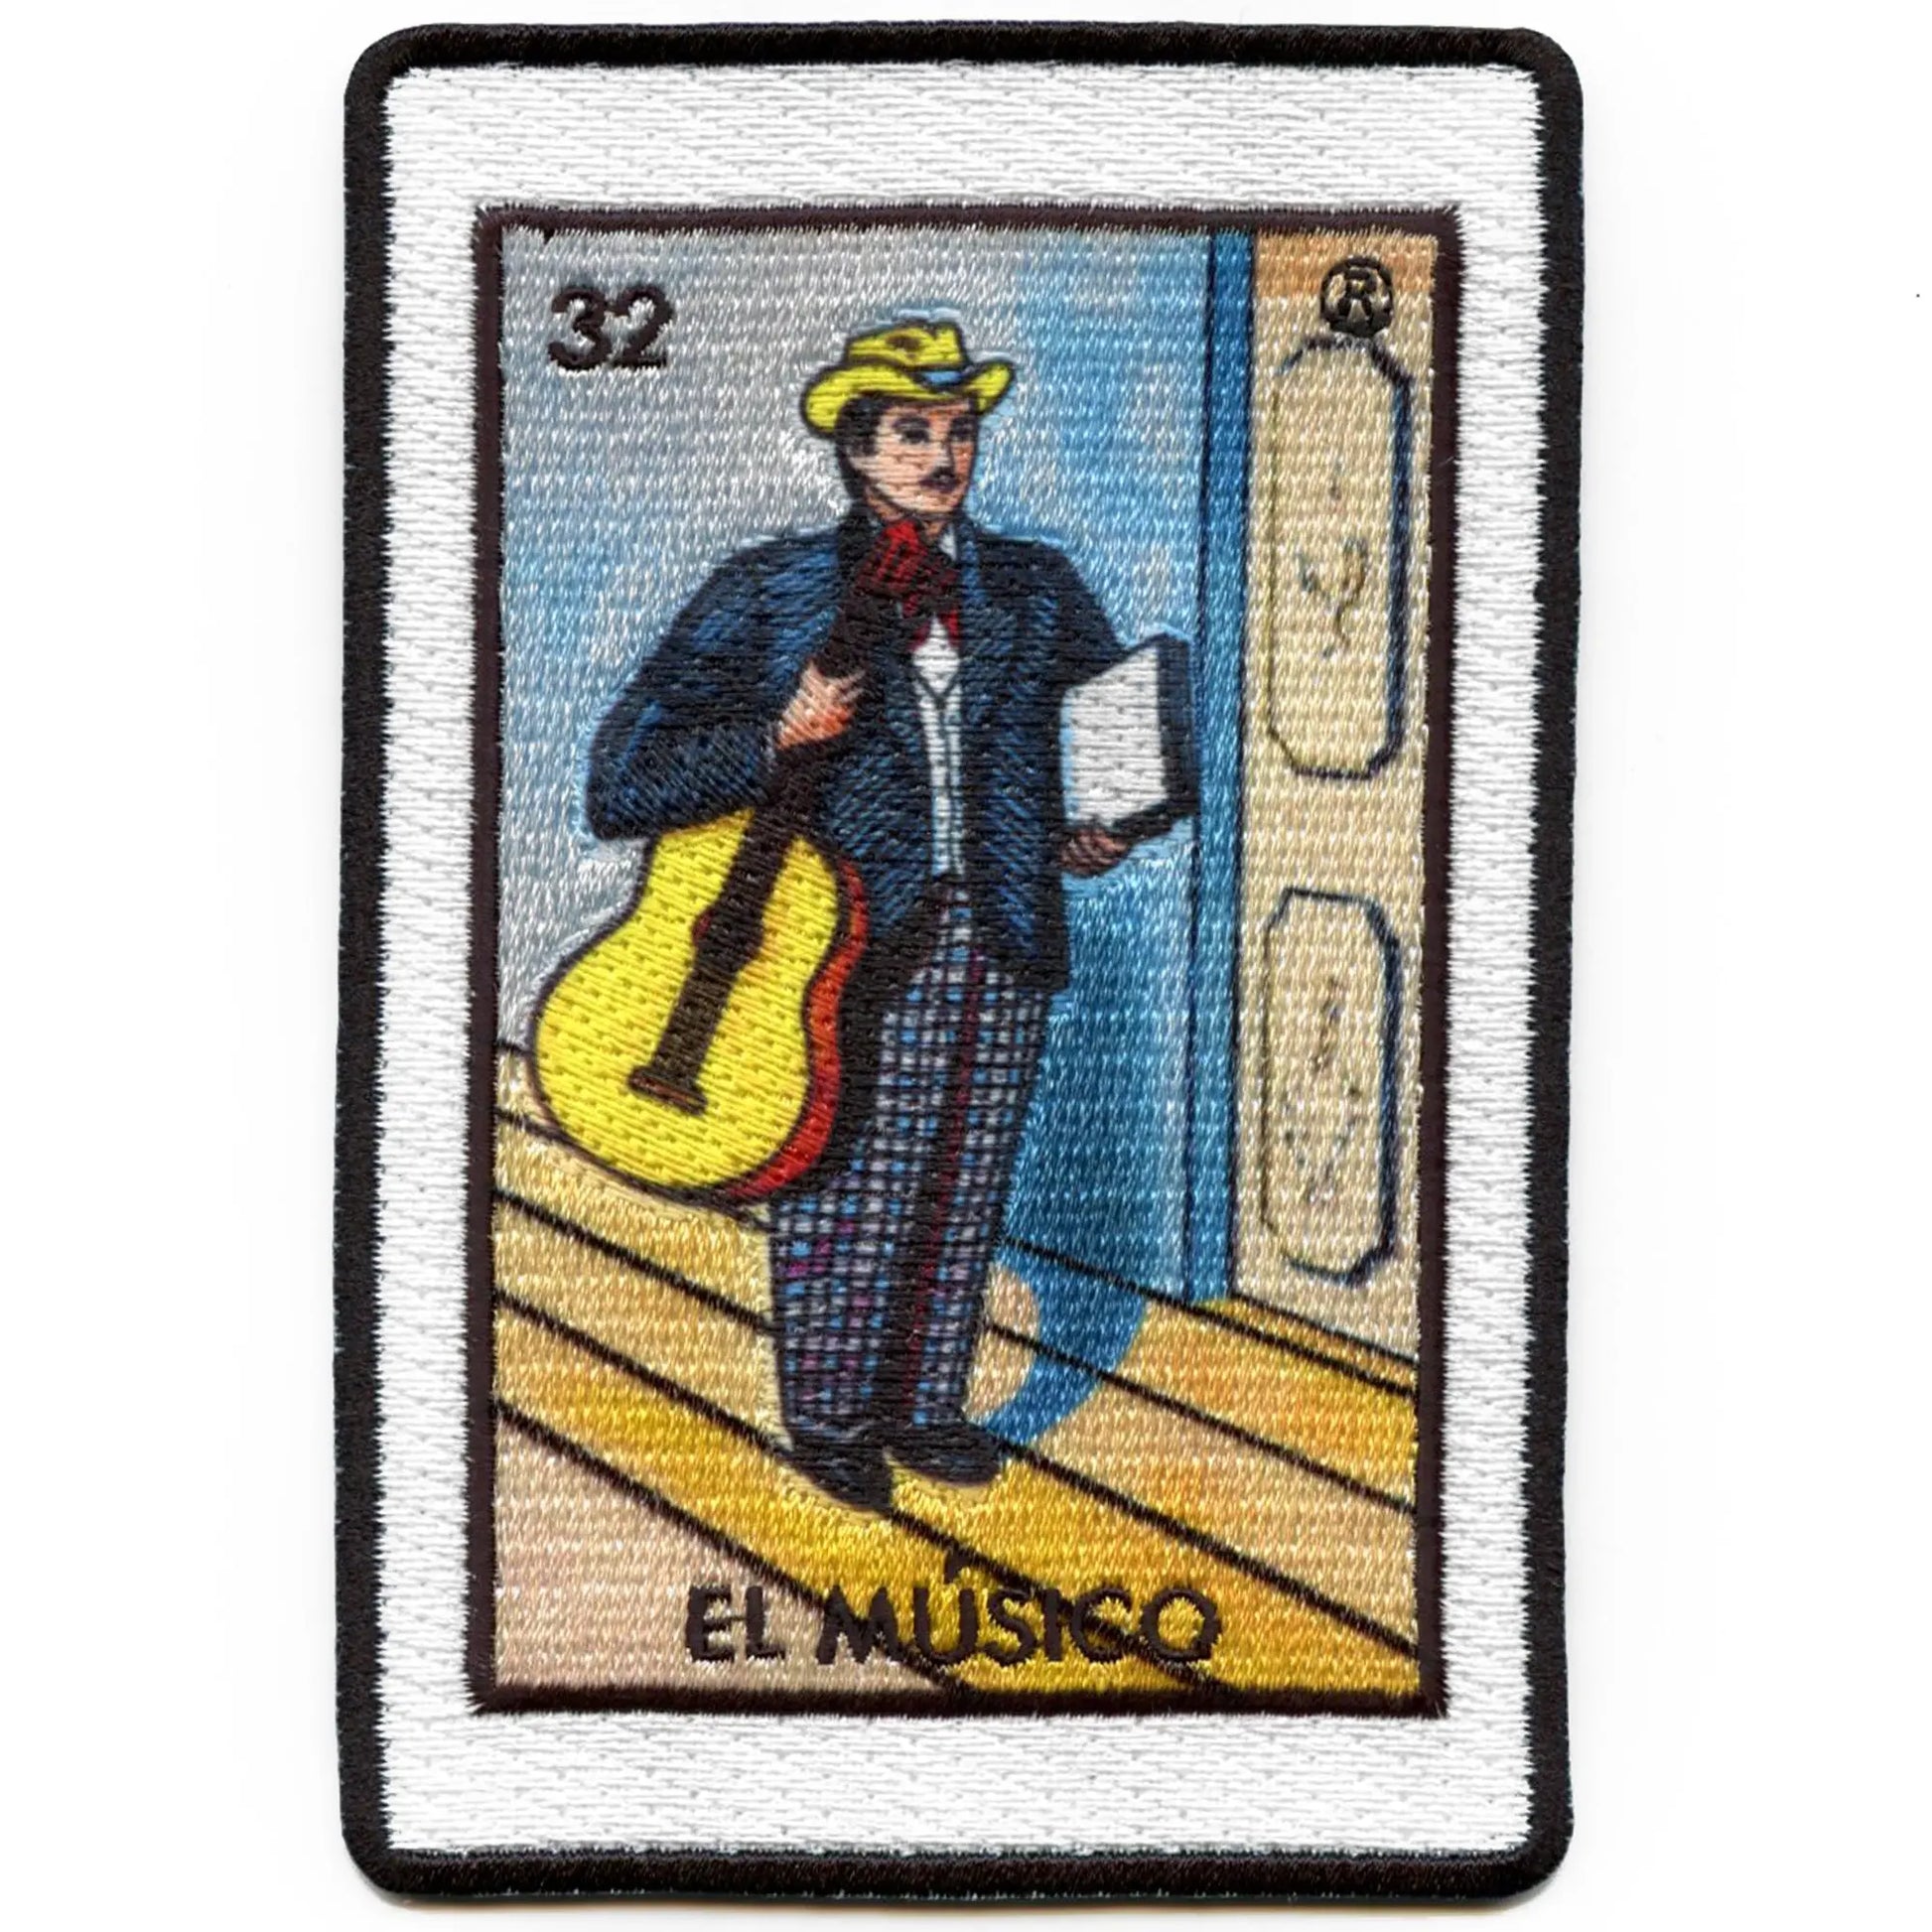 El Musico 32 Patch Mexican Loteria Card Sublimated Embroidery Iron On